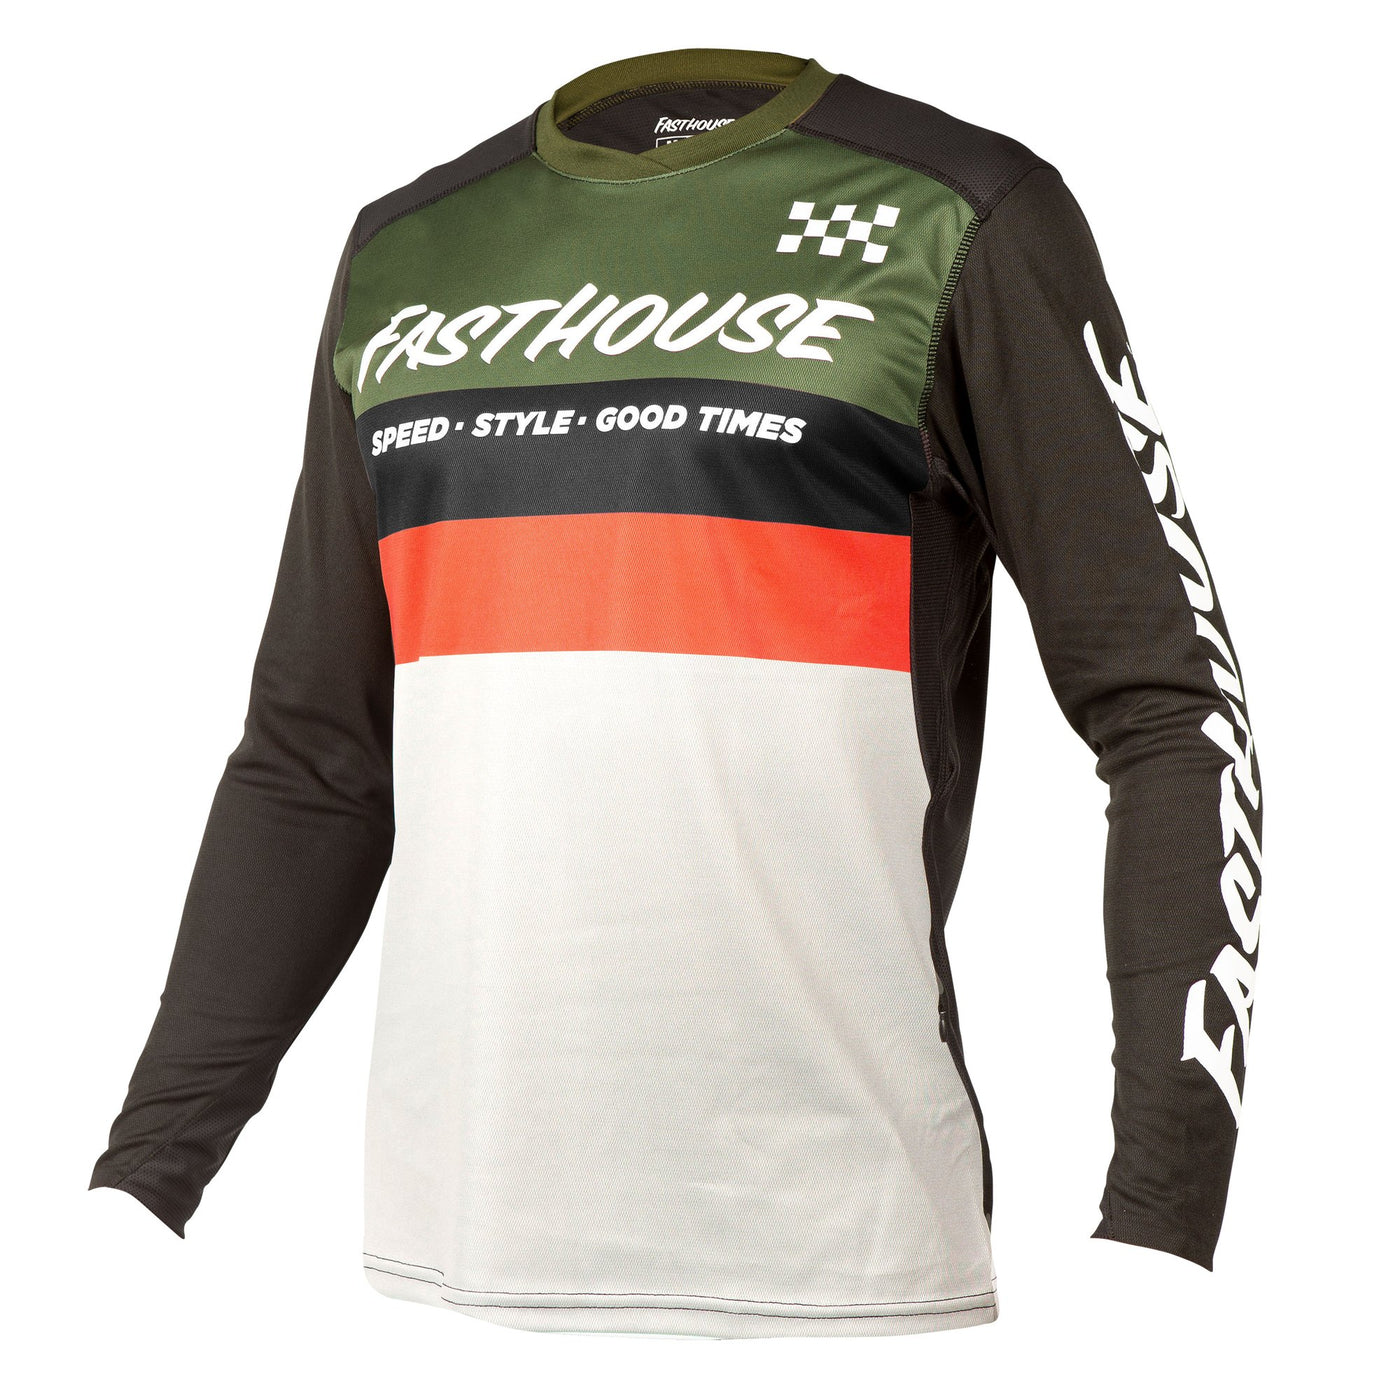 Fasthouse - Alloy Kilo LS Jersey - Olive/White